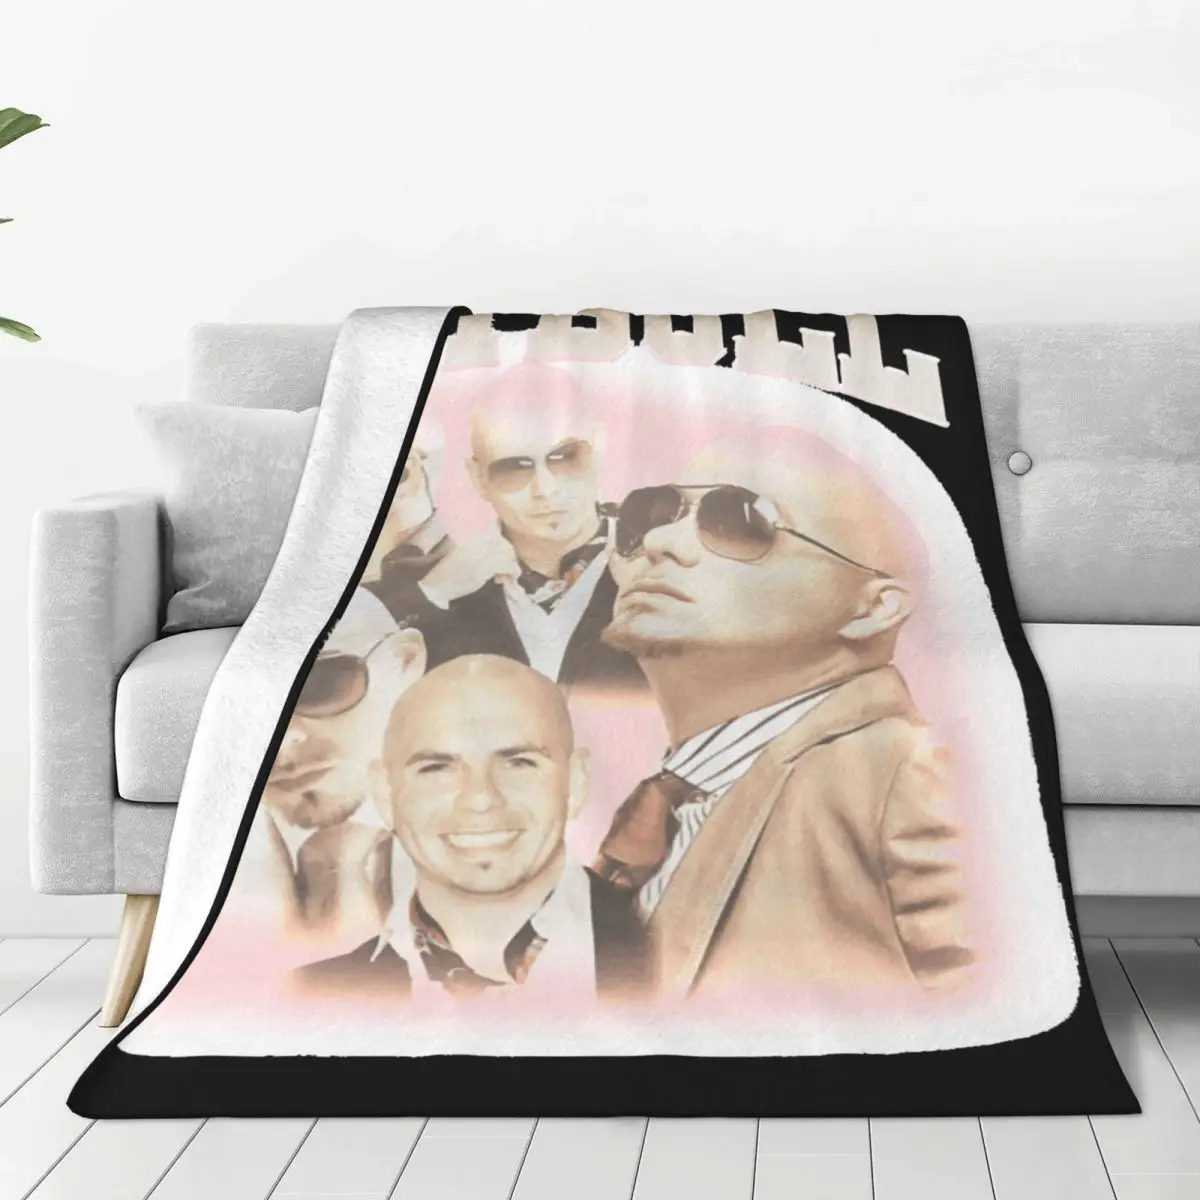 

Mr. Worldwide Pitbull Flannel Blankets Awesome Throw Blankets for Home Hotel Sofa 150*125cm